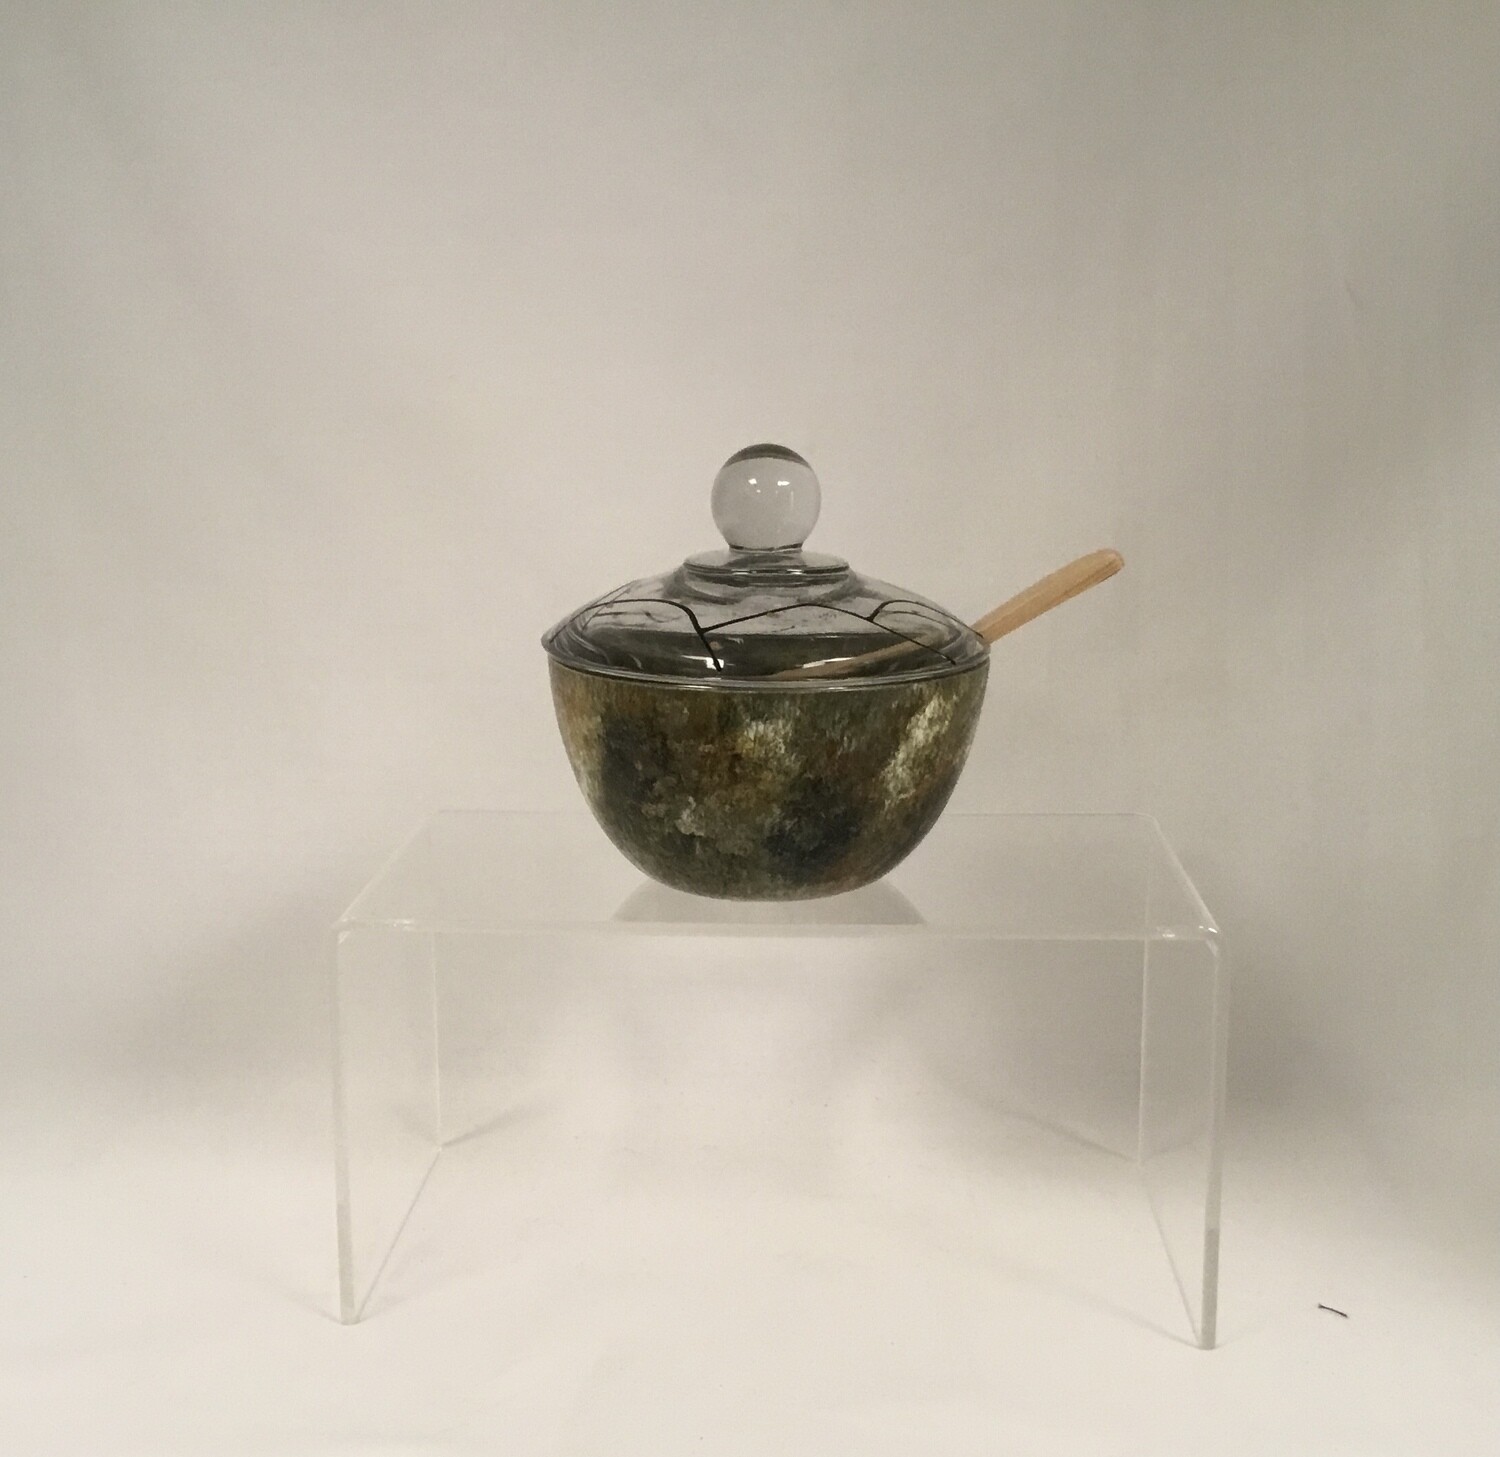 Lidded Painted Glass Bowl with Spoon - Forest Glen